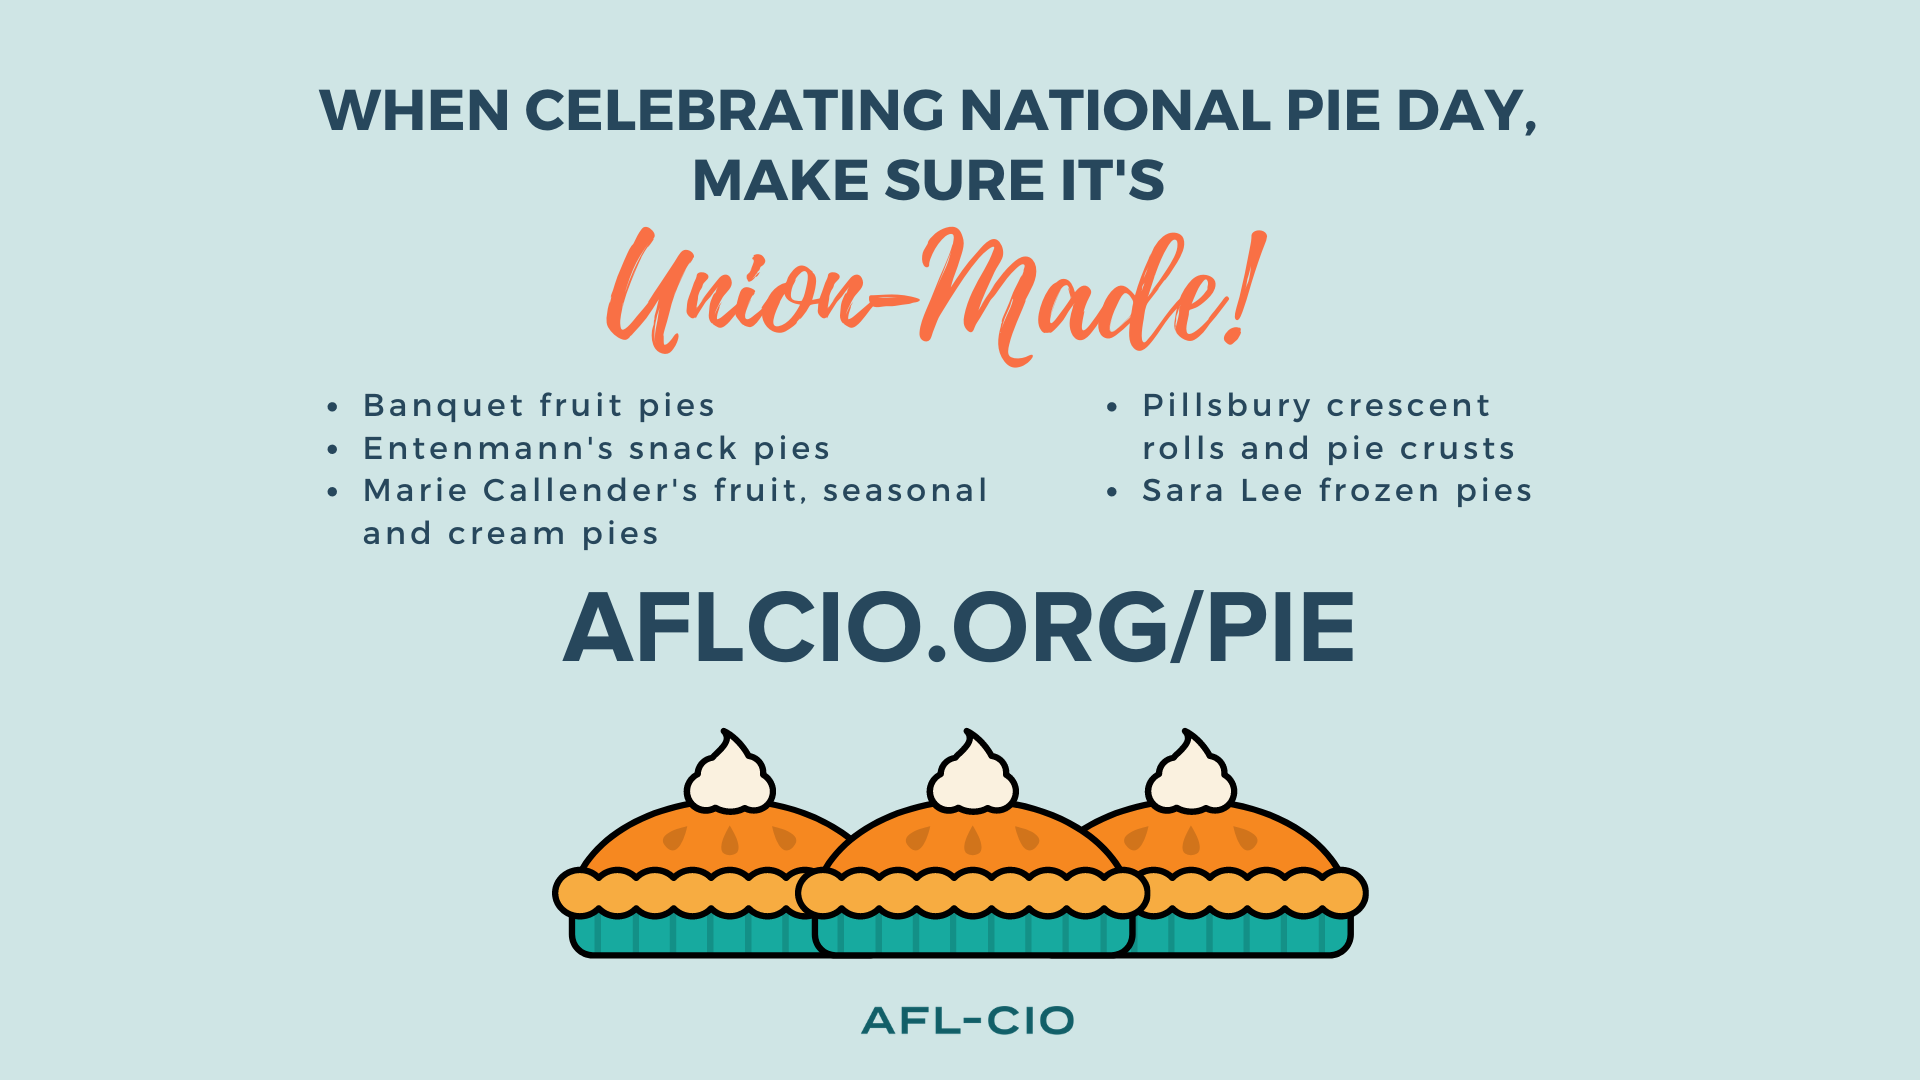 When Celebrating National Pie Day, Make Sure It's Union-Made